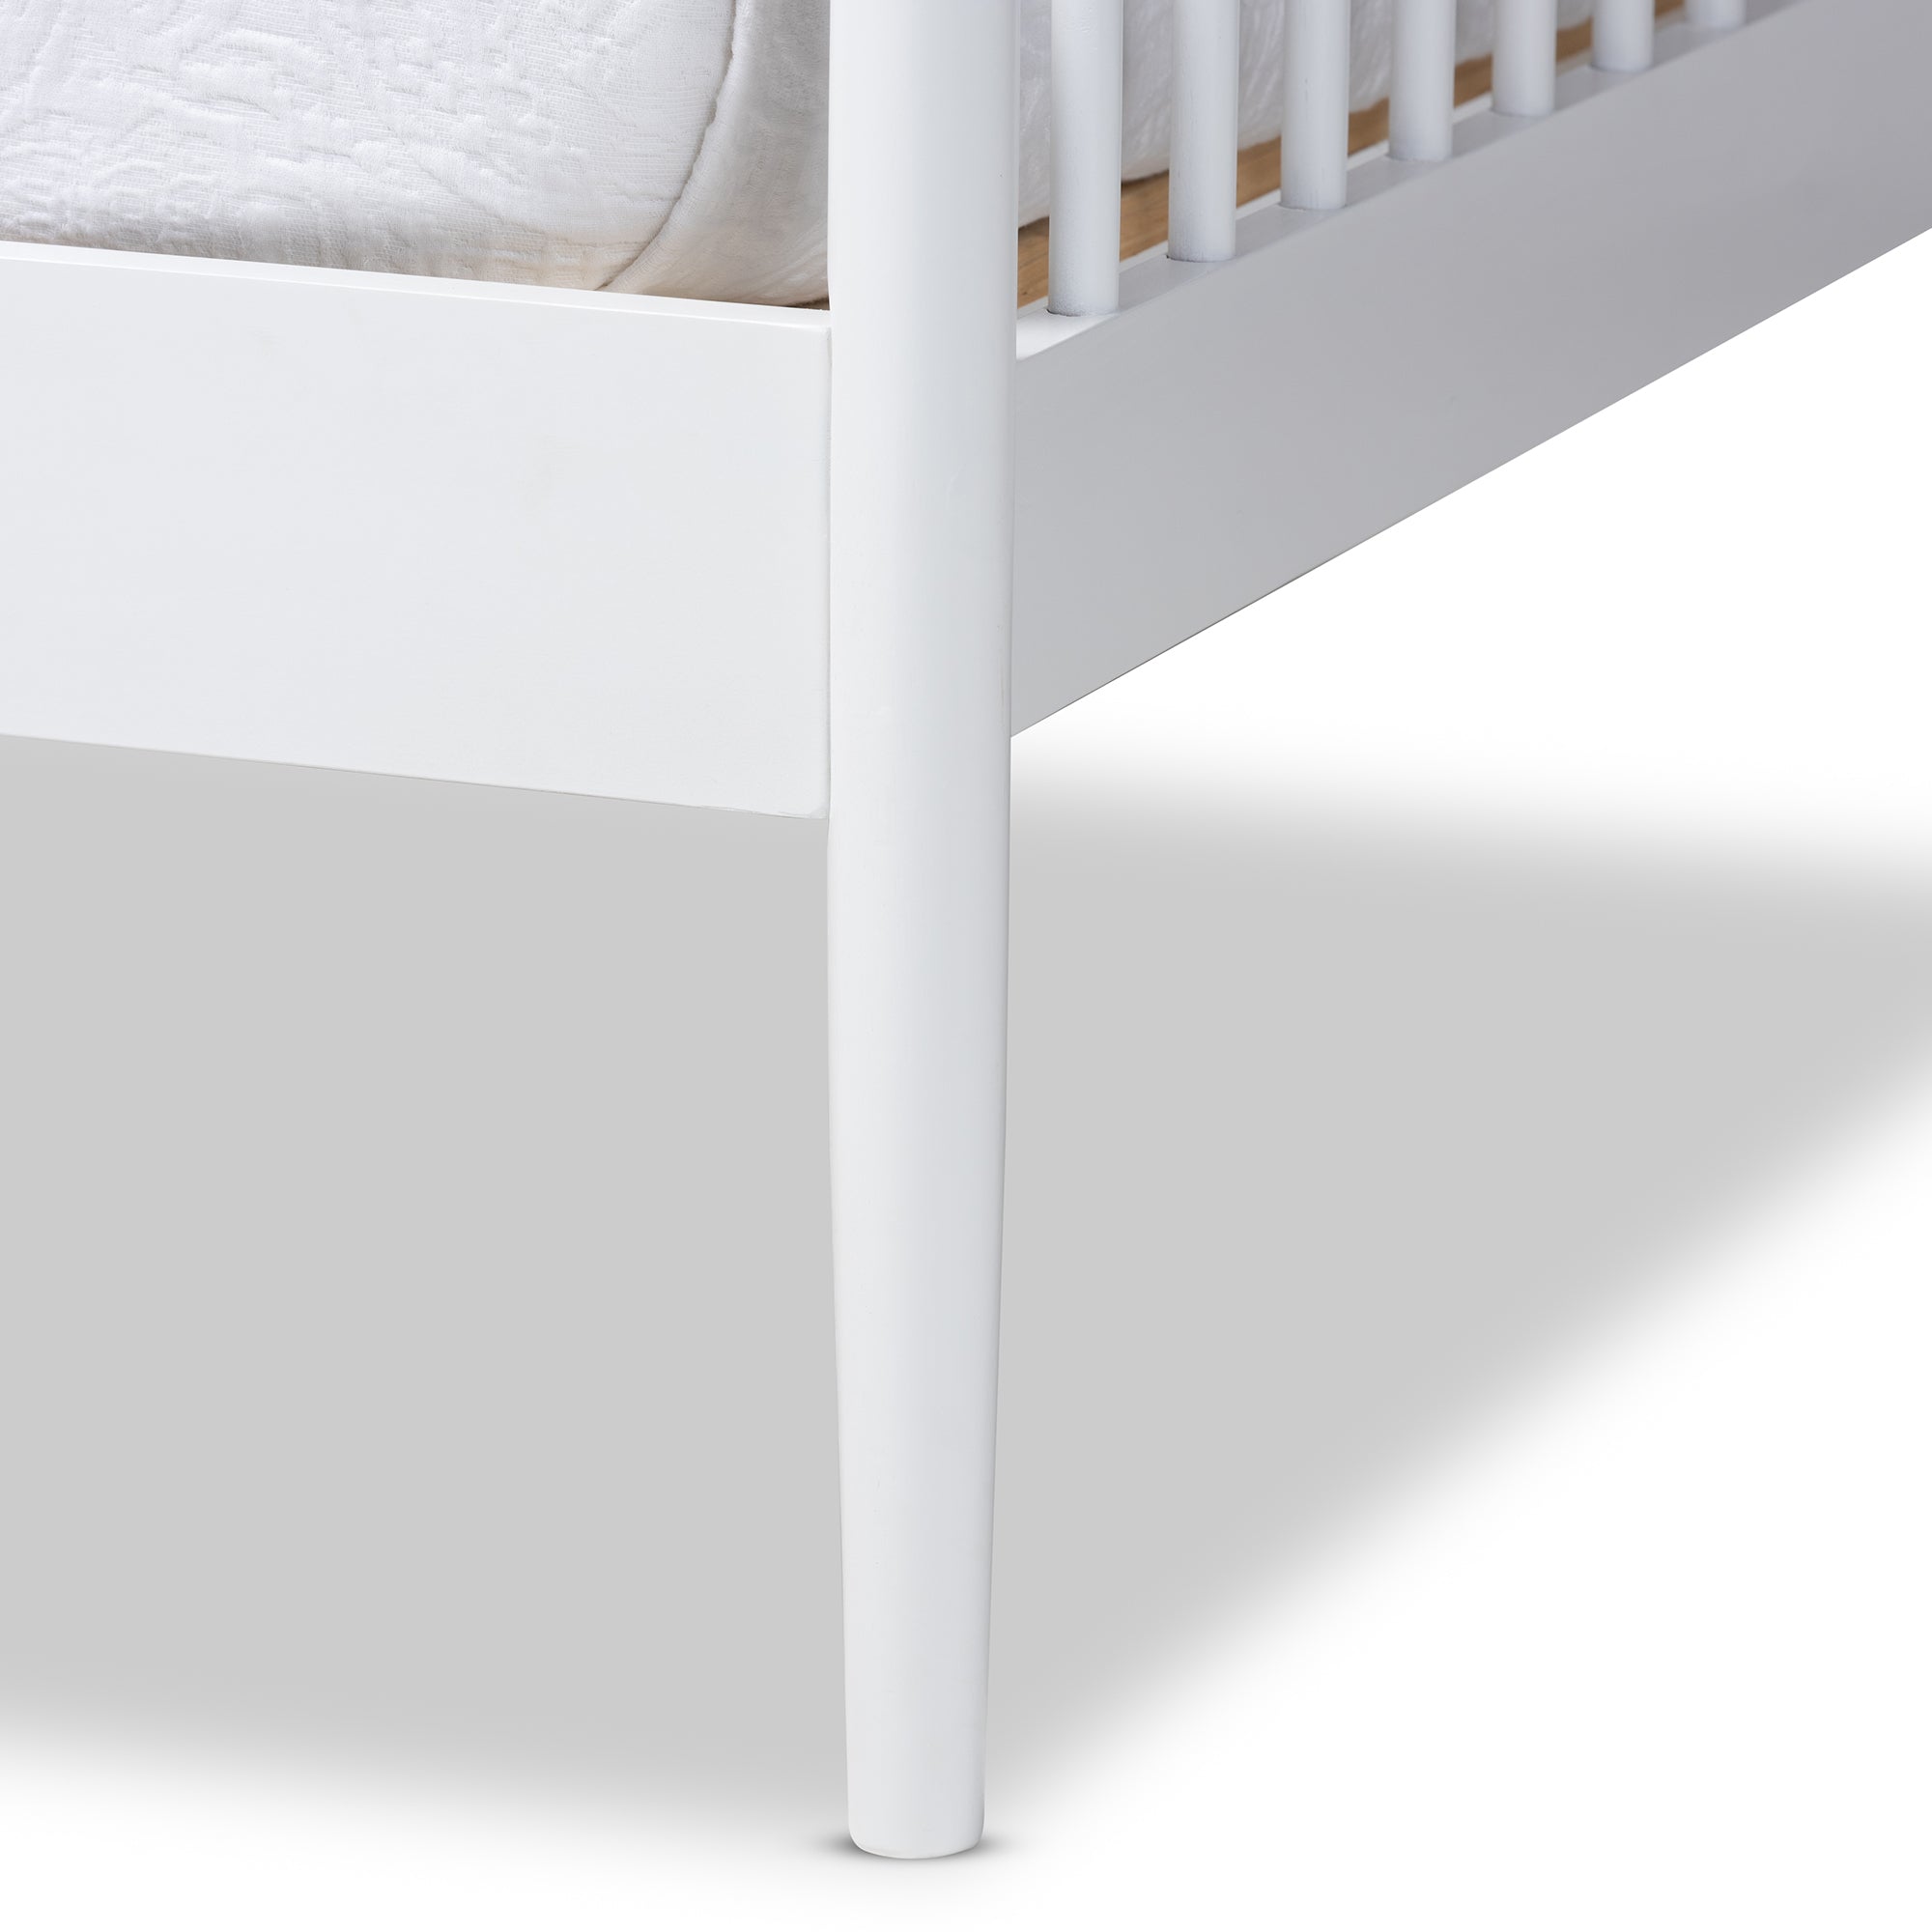 Renata Traditional Daybed-Daybed-Baxton Studio - WI-Wall2Wall Furnishings